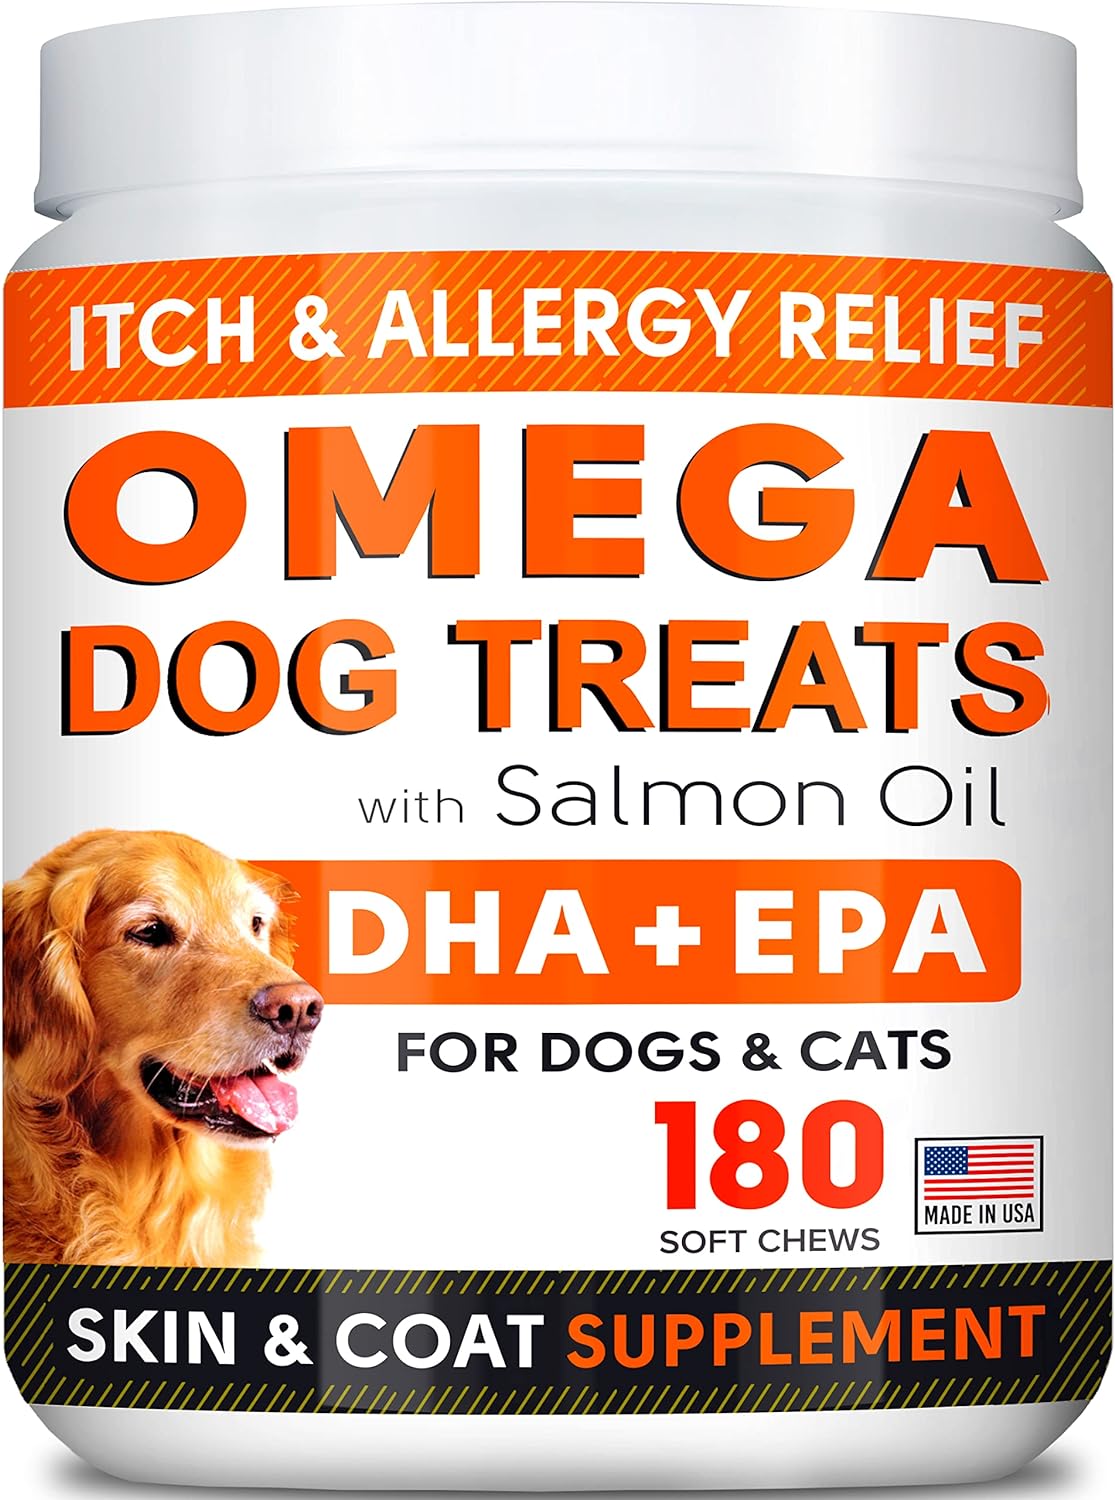 StrellaLab Fish Oil Omega 3 Treats for Dogs (180 Treats) - Allergy & Itch Relief - Skin & Coat Supplement - Joint Health - Wild Alaskan Salmon Oil - Shedding, Itchy Skin Relief - Omega 3 6 9 - EPA&DHA